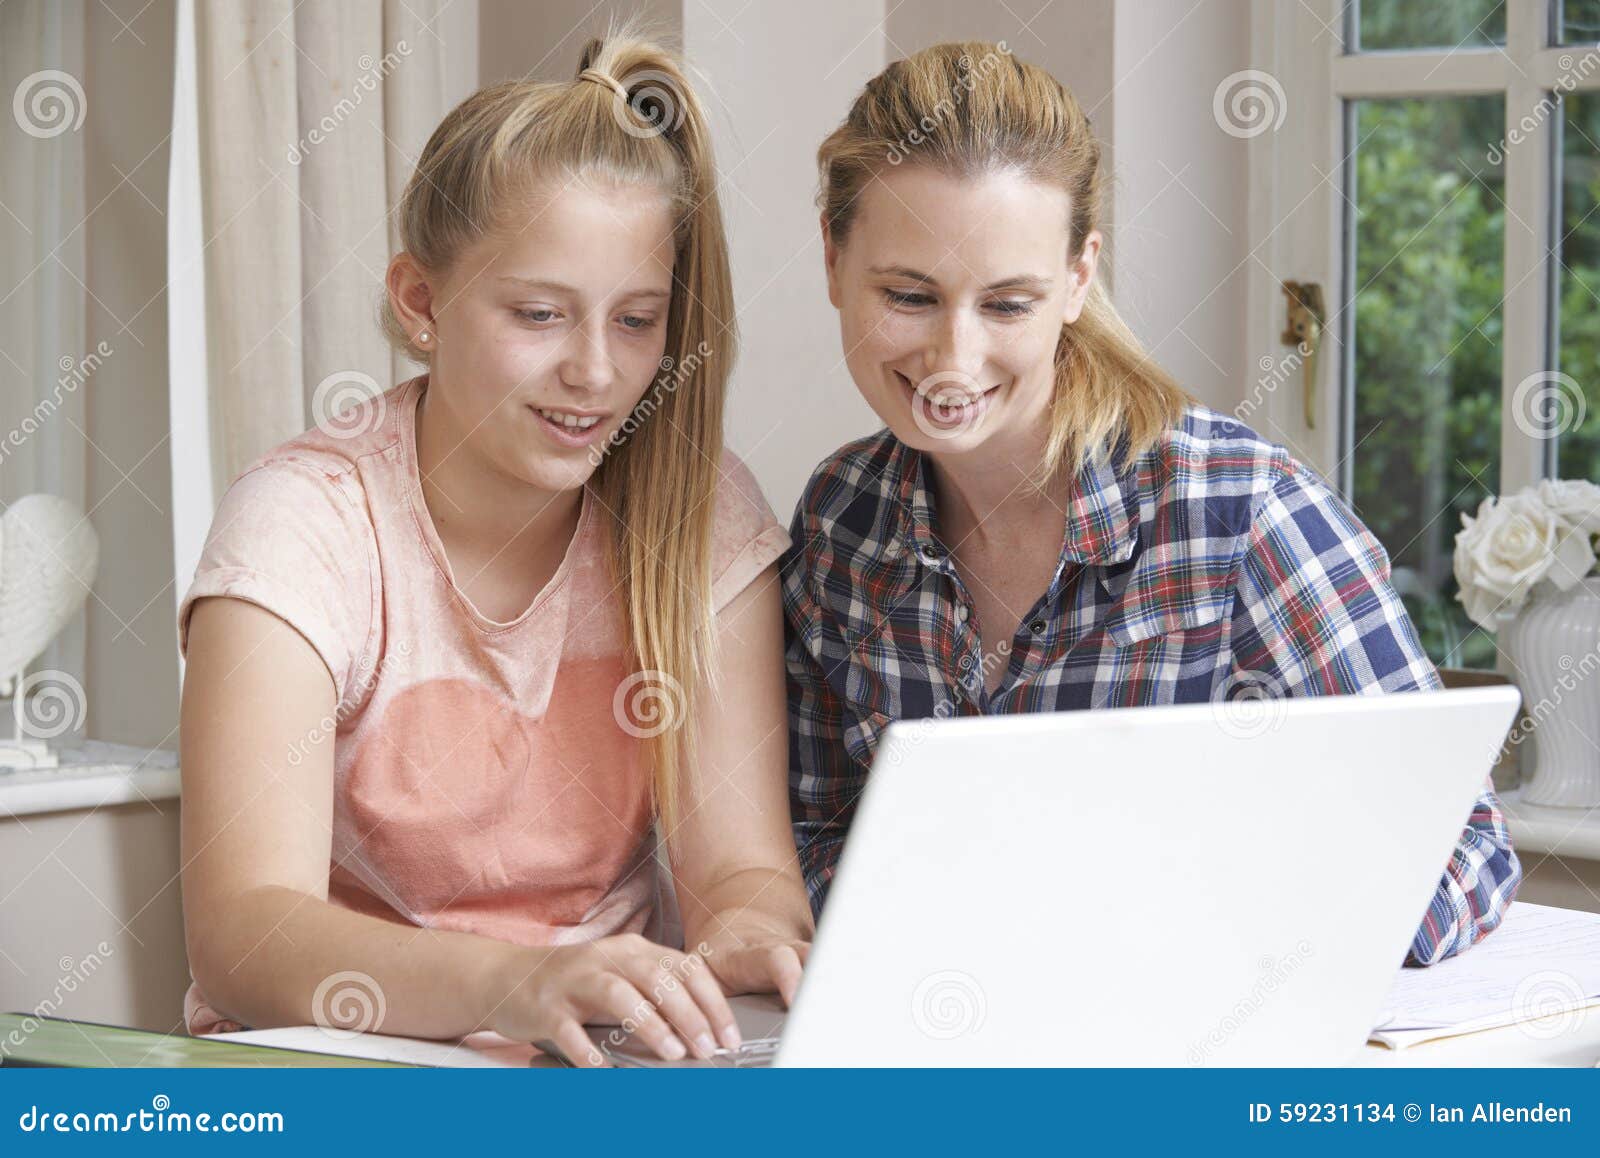 female home tutor helping girl with studies using laptop